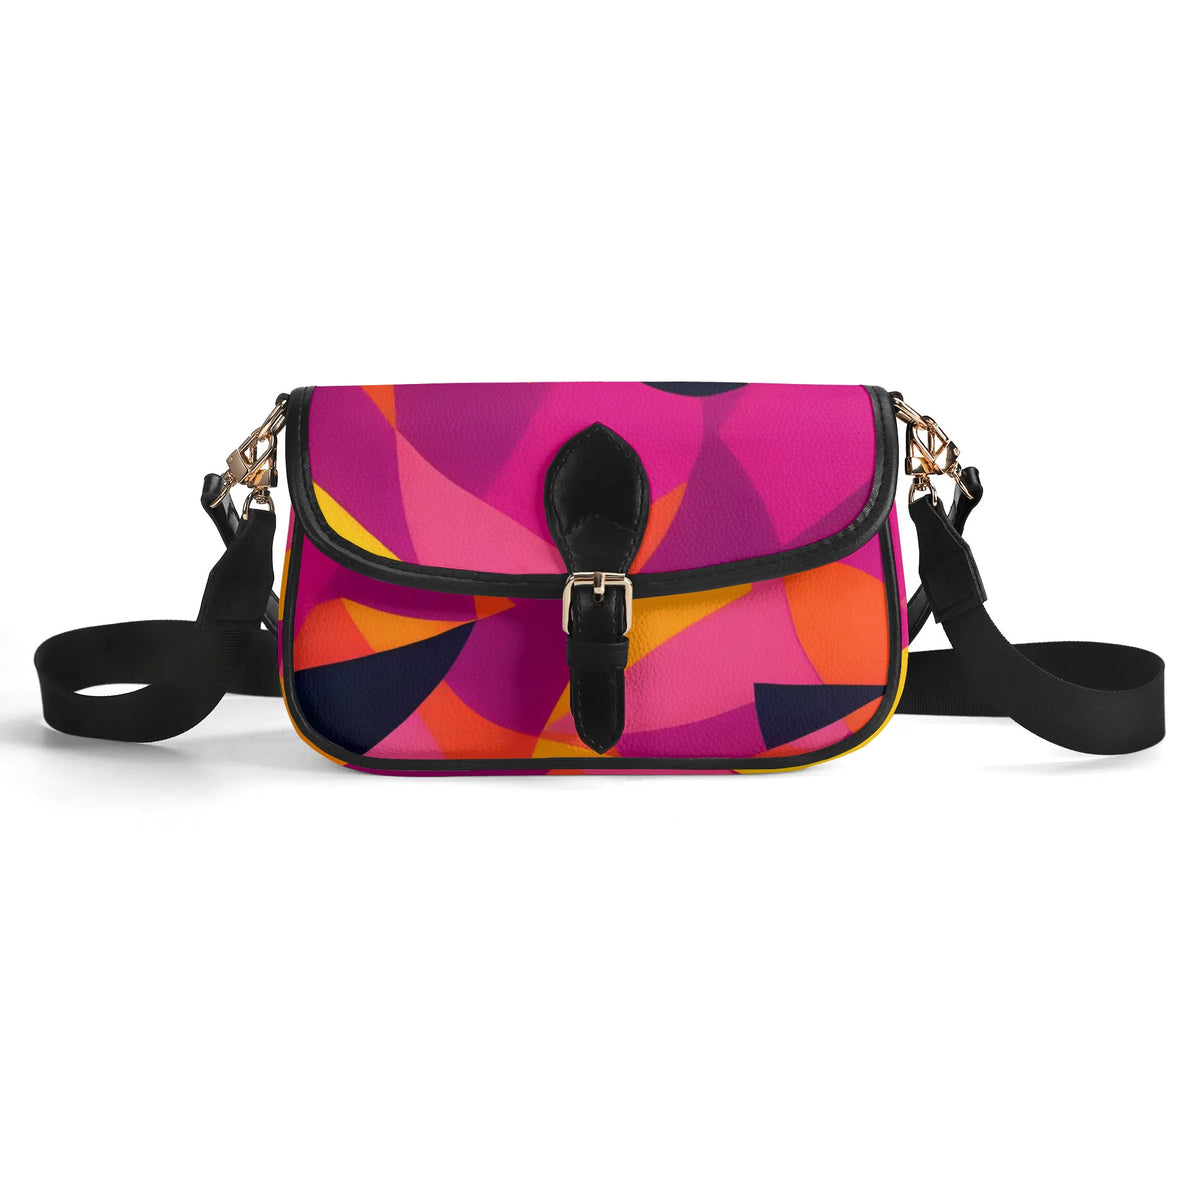 Colorful Abstract Designed Crossbody Bag with Black Faux Leather Strap and Buckle - Stylish Pink, Orange, and Yellow Women's Handbag